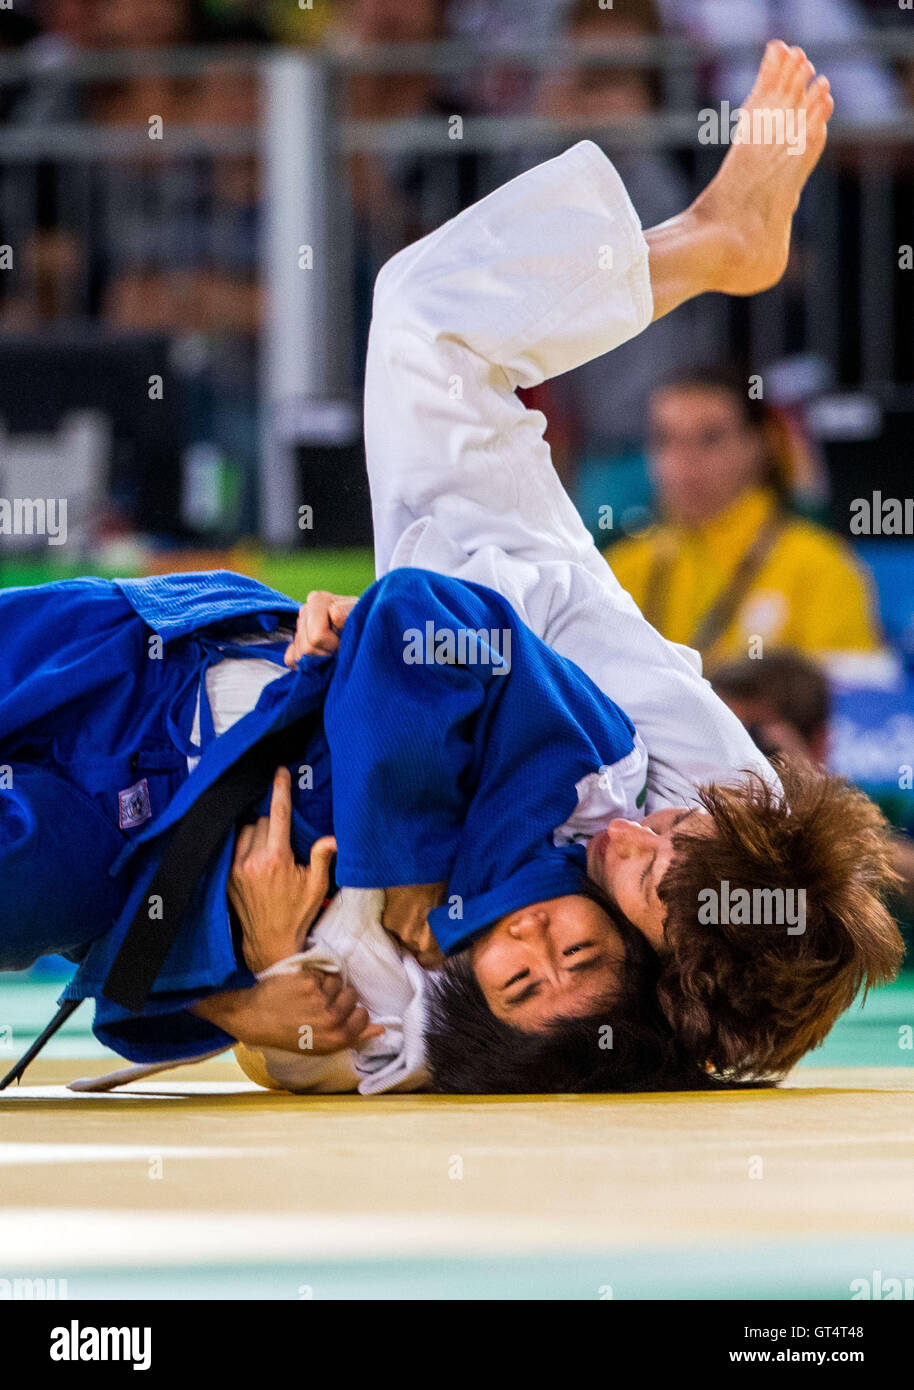 Rio de Janeiro, Brazil. 8th September, 2016. Carmen Brussig (white) of Germany and Liqing Li of China compete during the women's -48 kg finals of the judo event during the Rio 2016 Paralympic Games, Rio de Janeiro, Brazil, 08 September 2016. Photo: Jens Buettner/dpa Credit:  dpa picture alliance/Alamy Live News Stock Photo